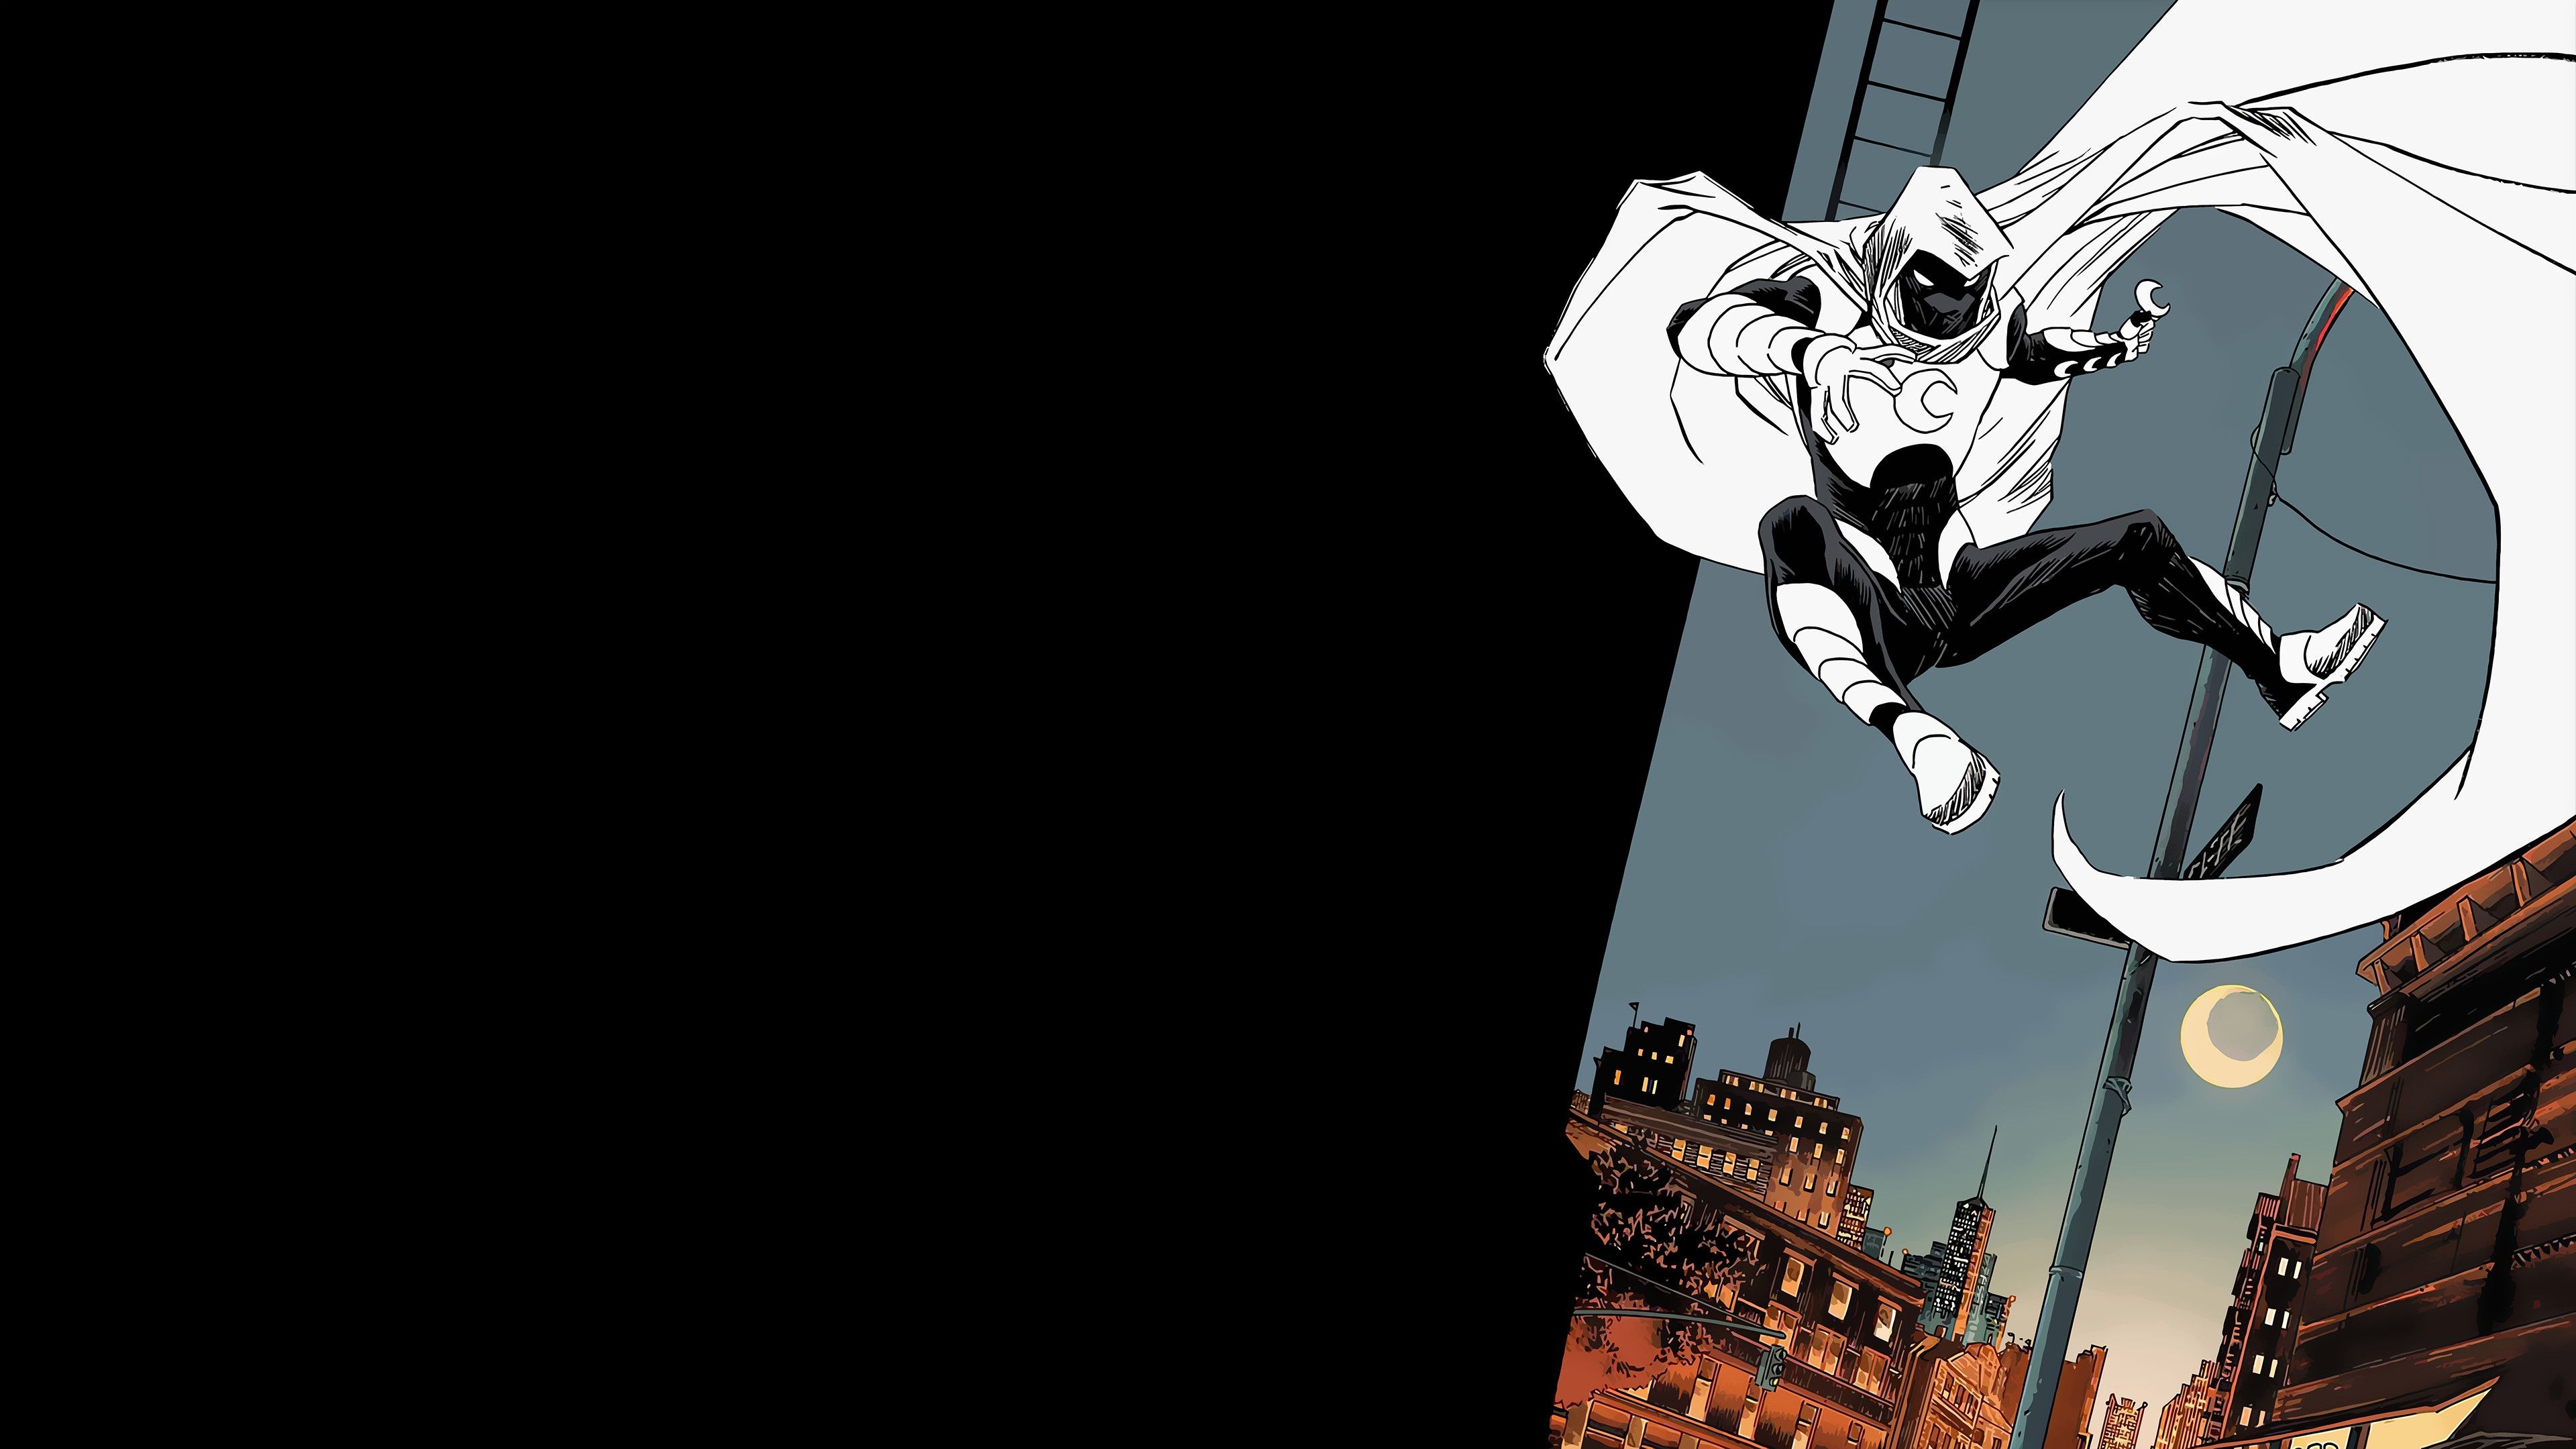 Moon Knight wallpapers, Moon Knight backgrounds, Moon Knight top images, Moon Knight download, 3840x2160 4K Desktop